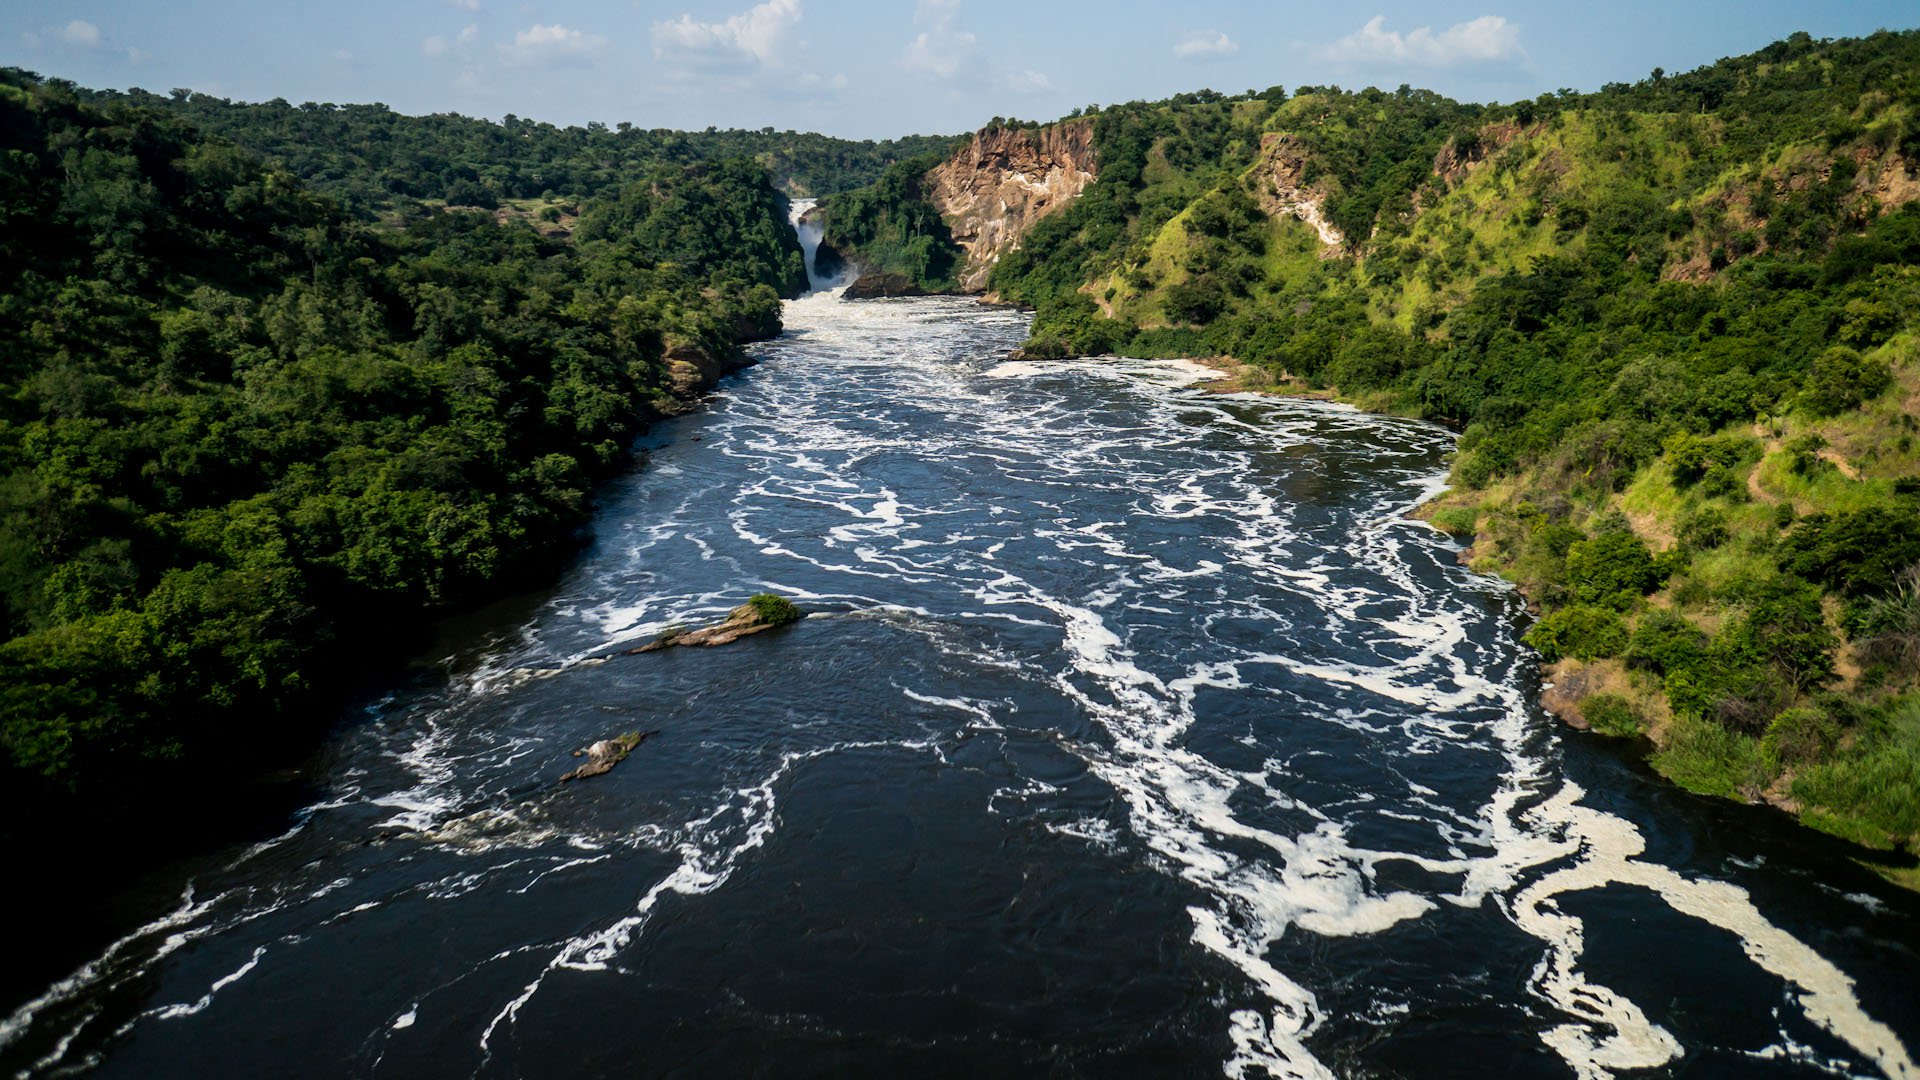 The Nile River’s Source